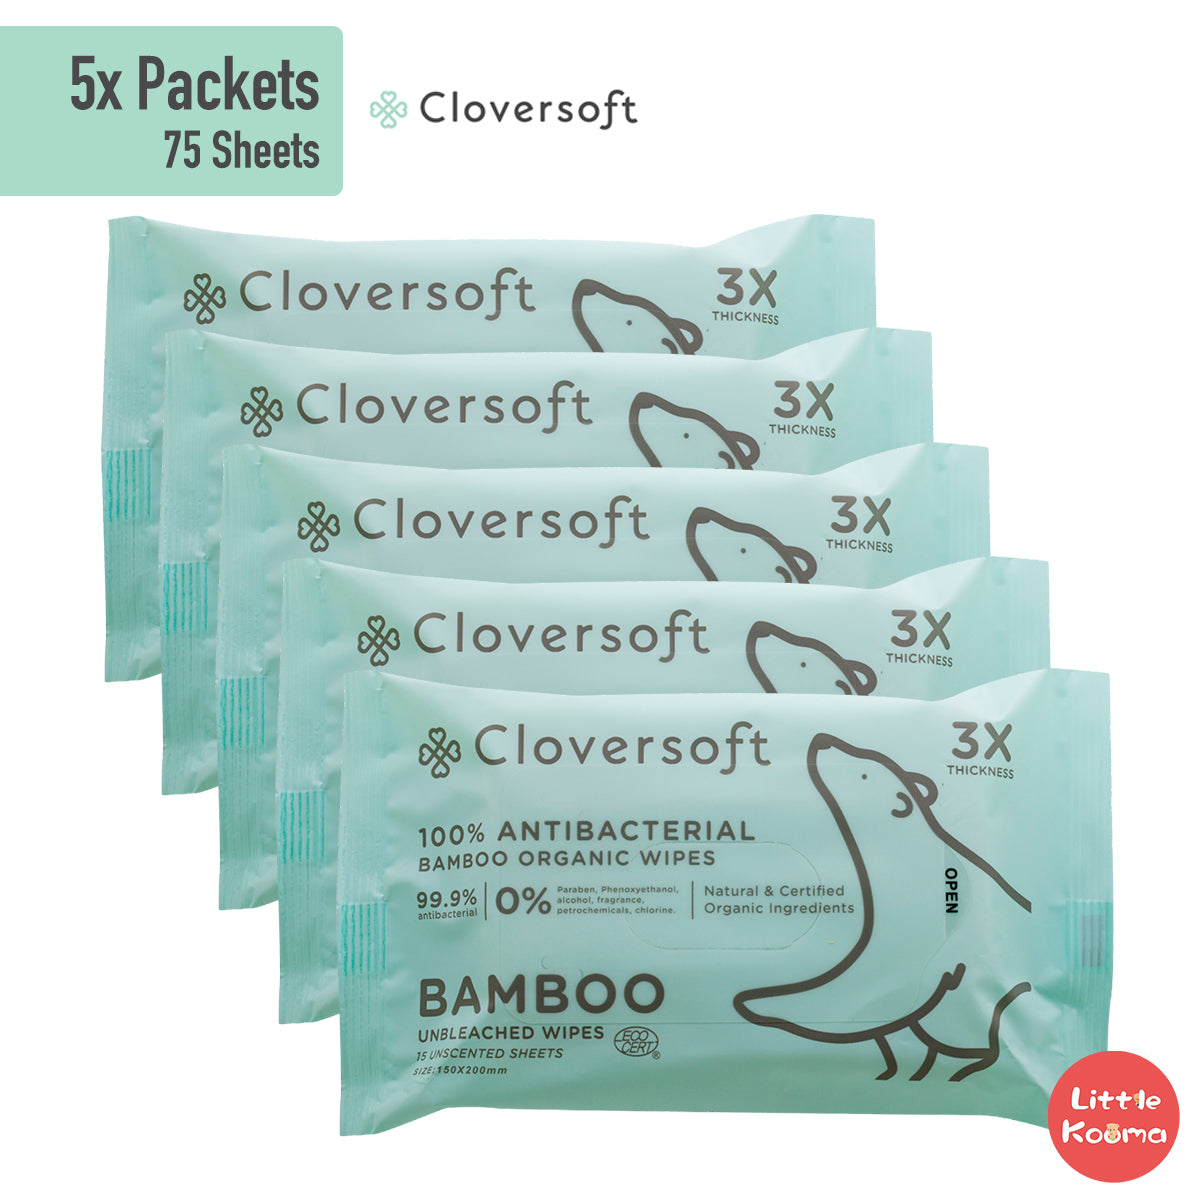 Cloversoft Antibacterial Organic Baby Wipes Made of Unbleached Bamboo - 15 sheets - Little Kooma